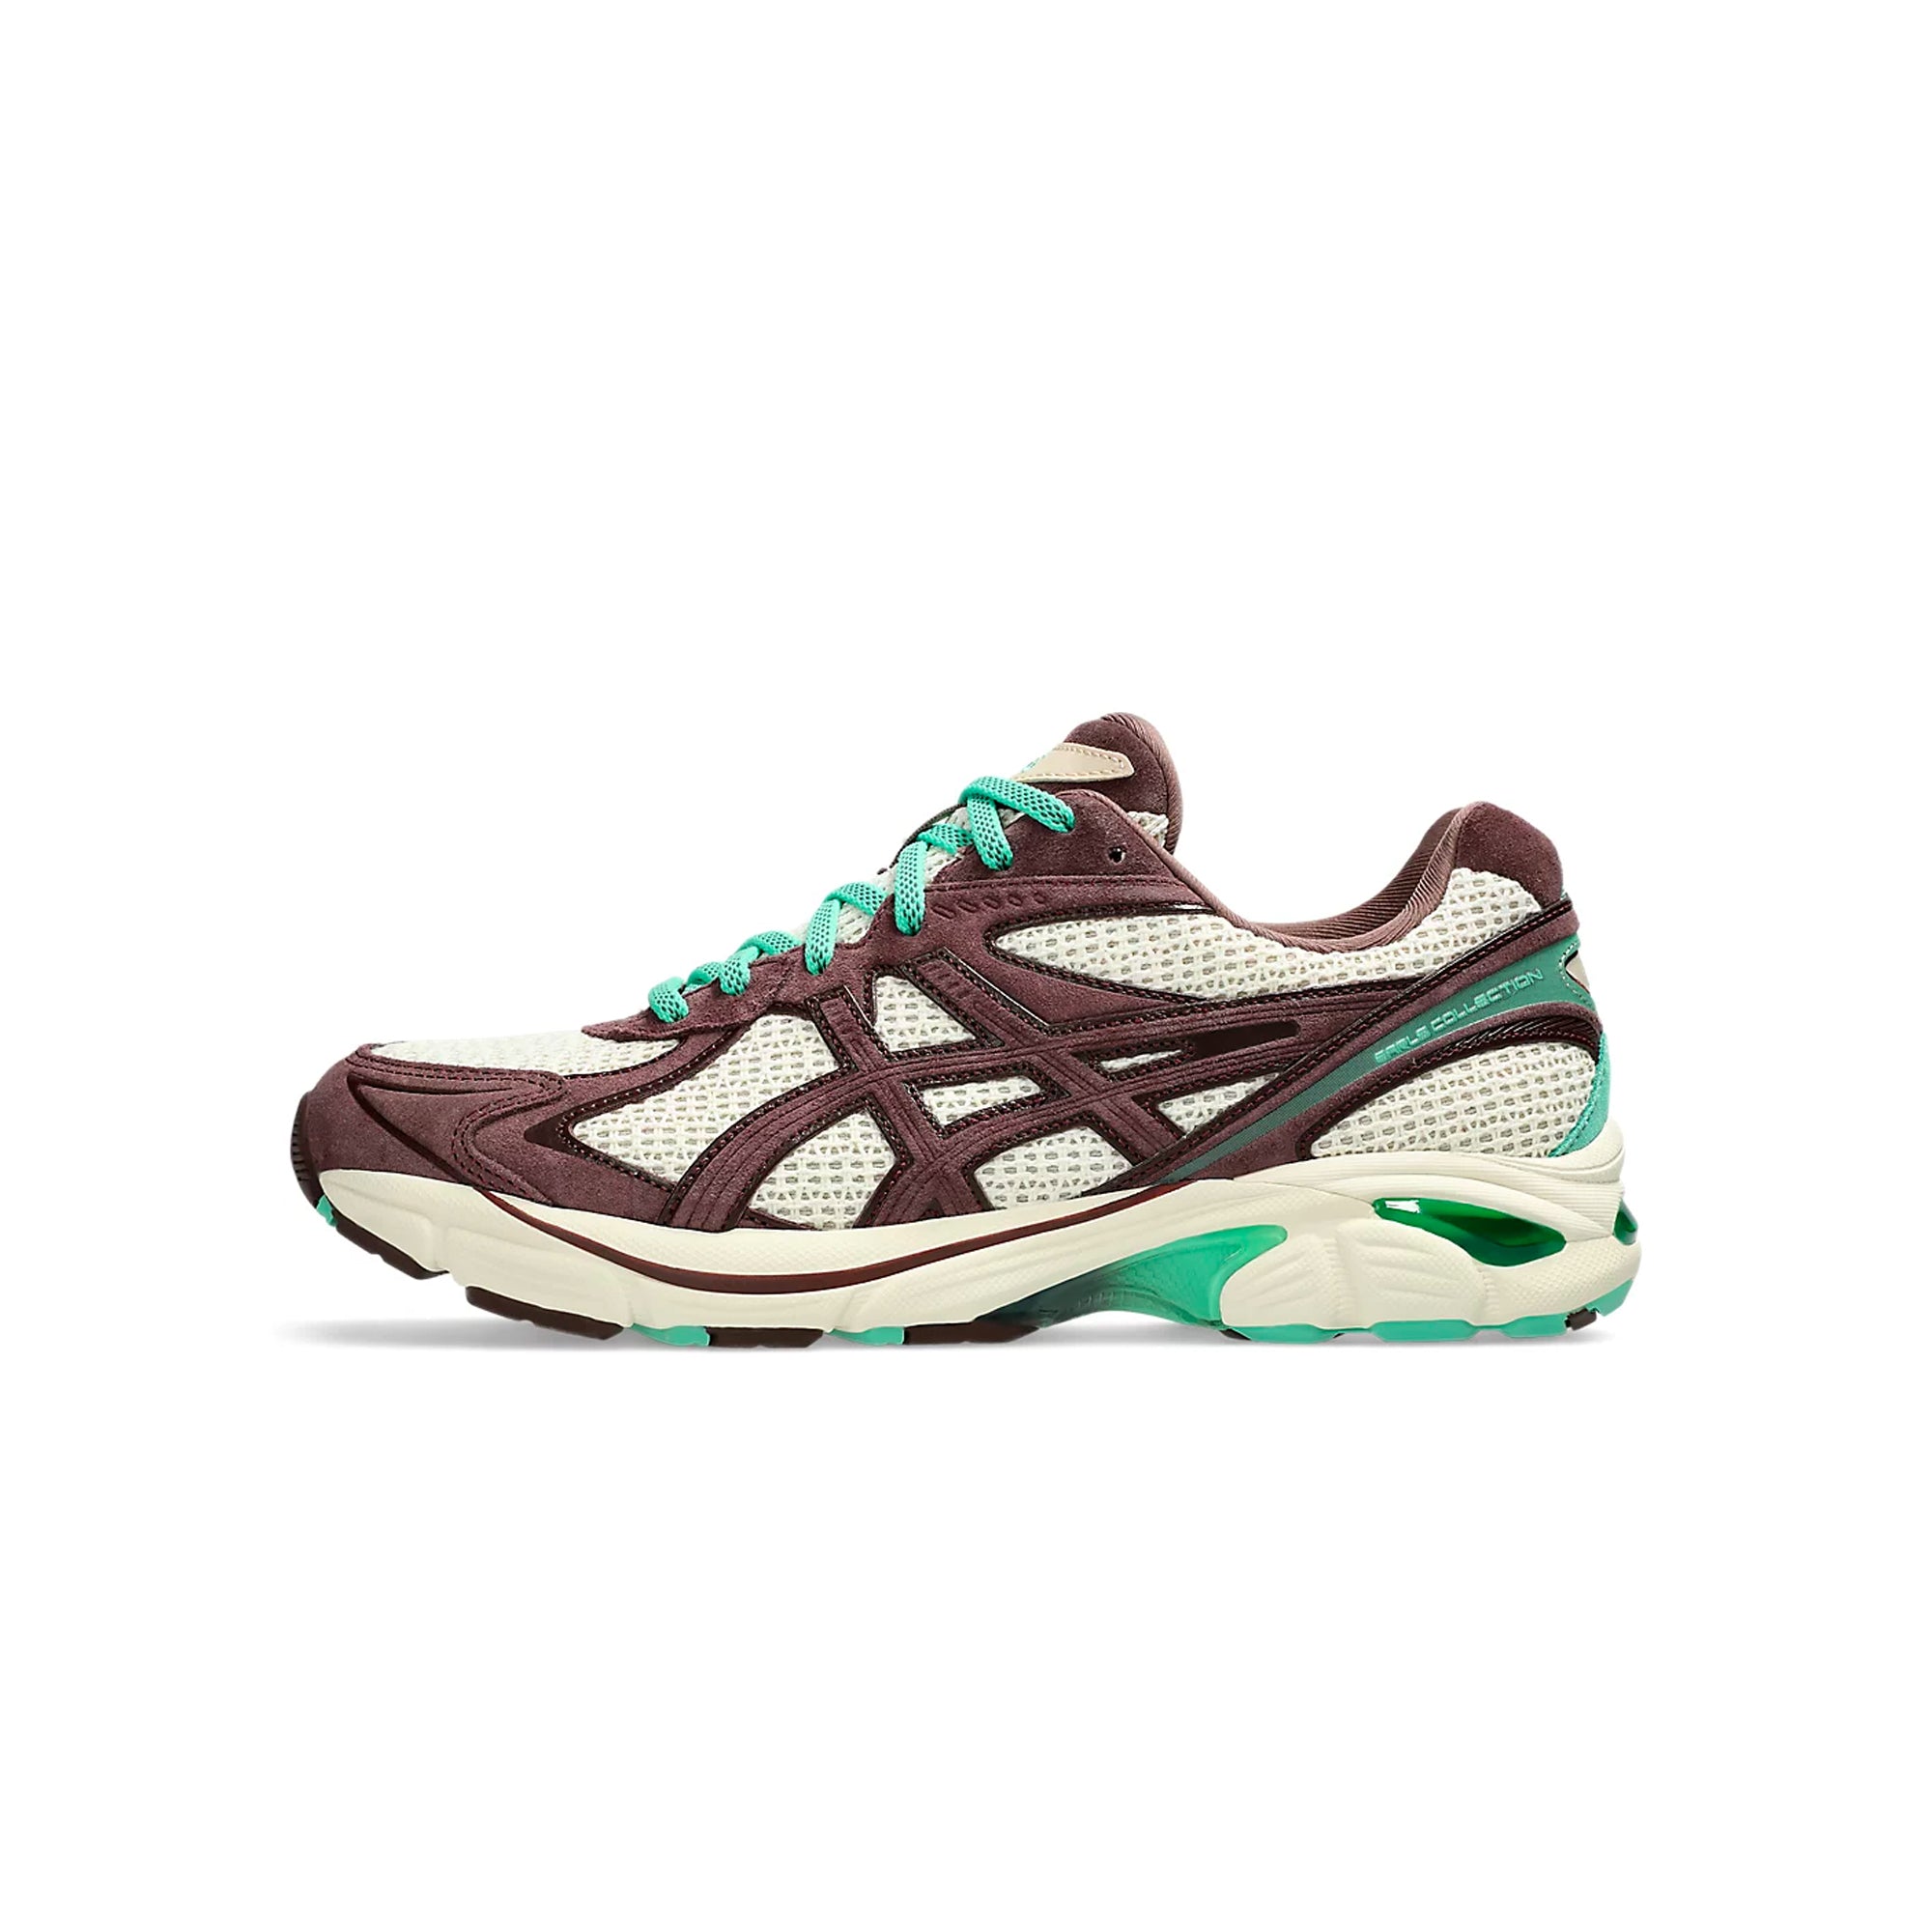 Asics x EARLS GT-2160 Shoes card image